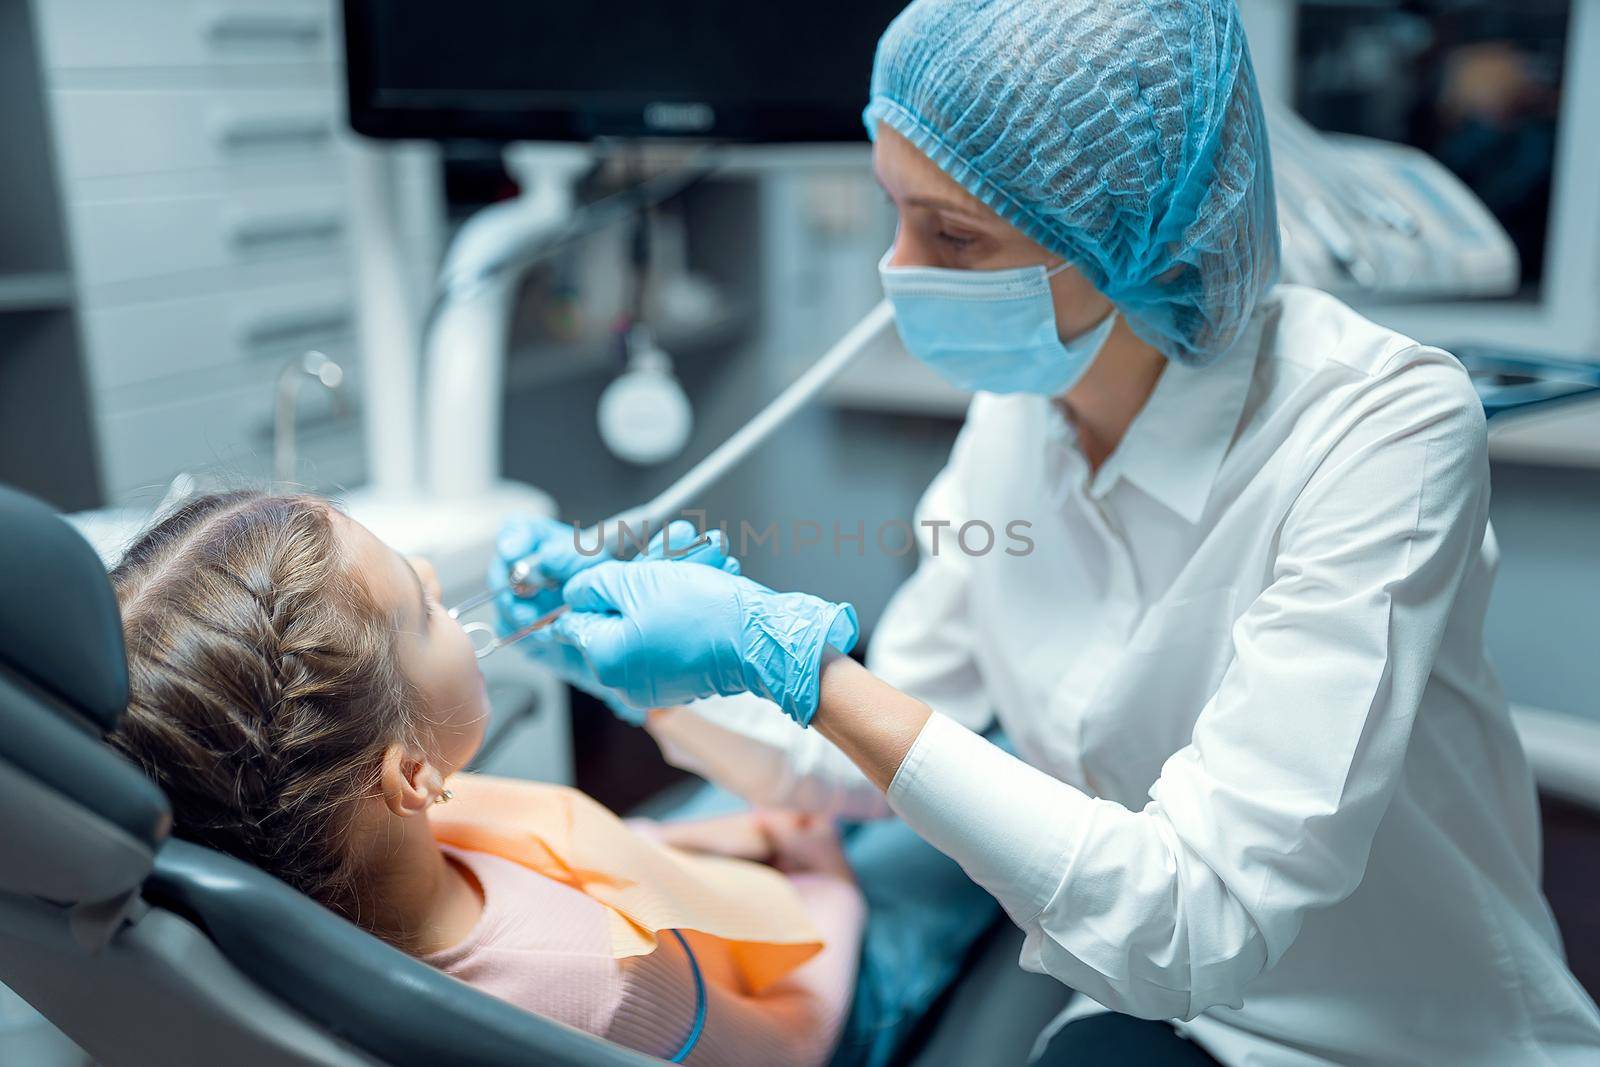 Female dentist treats teeth of little girl patient at dental office. Dentistry concept by Studio_SOK